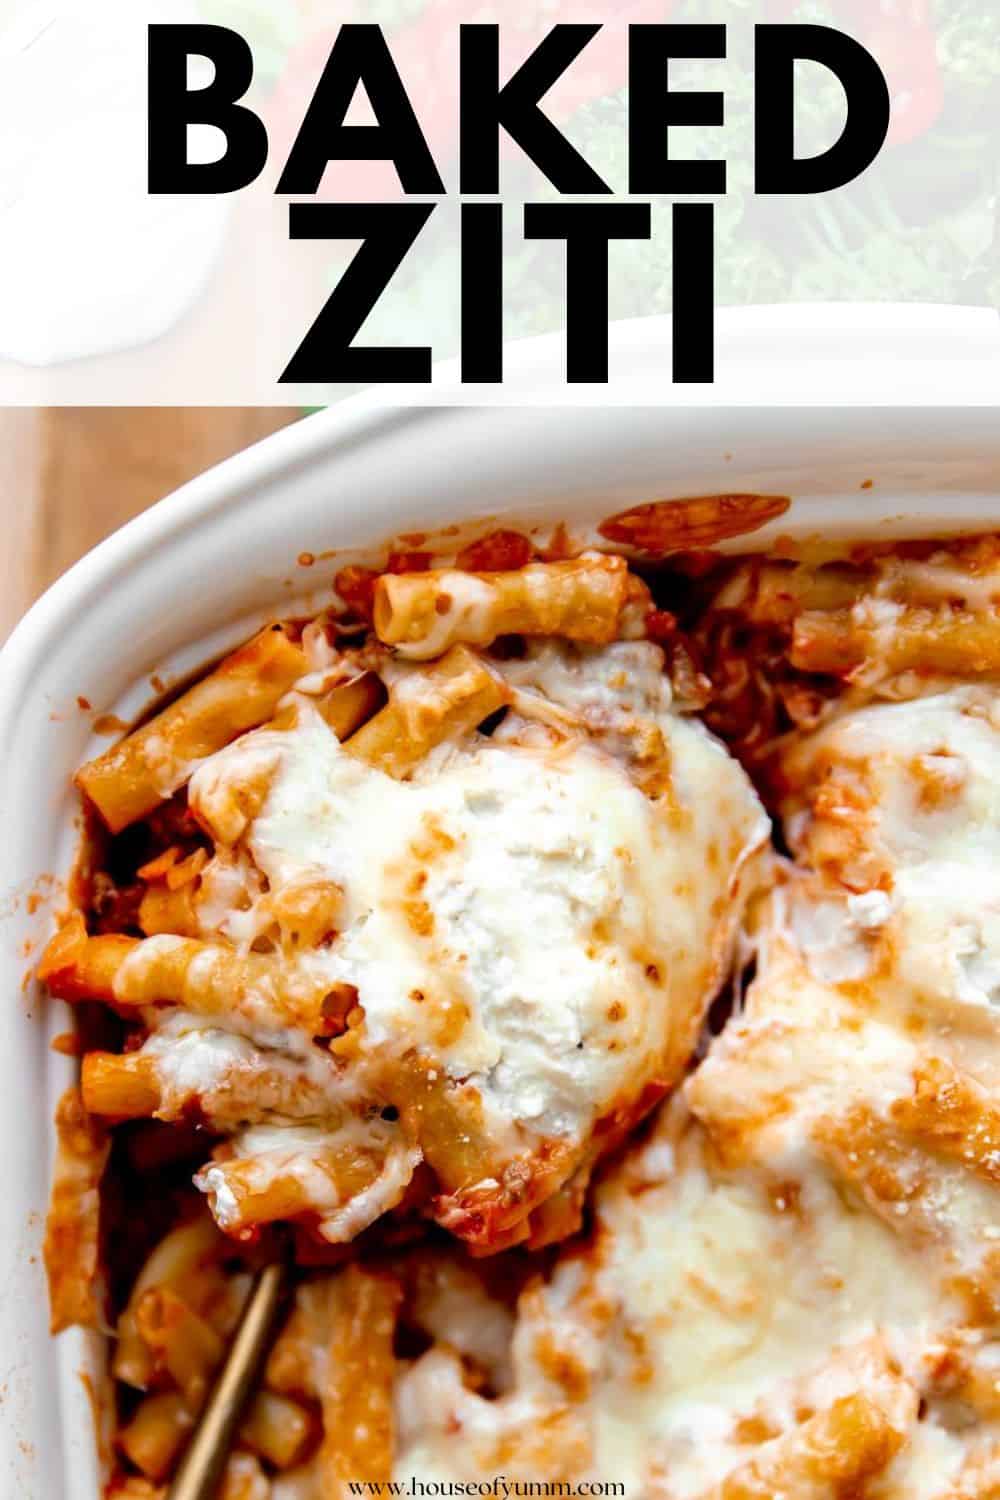 Baked ziti with text.